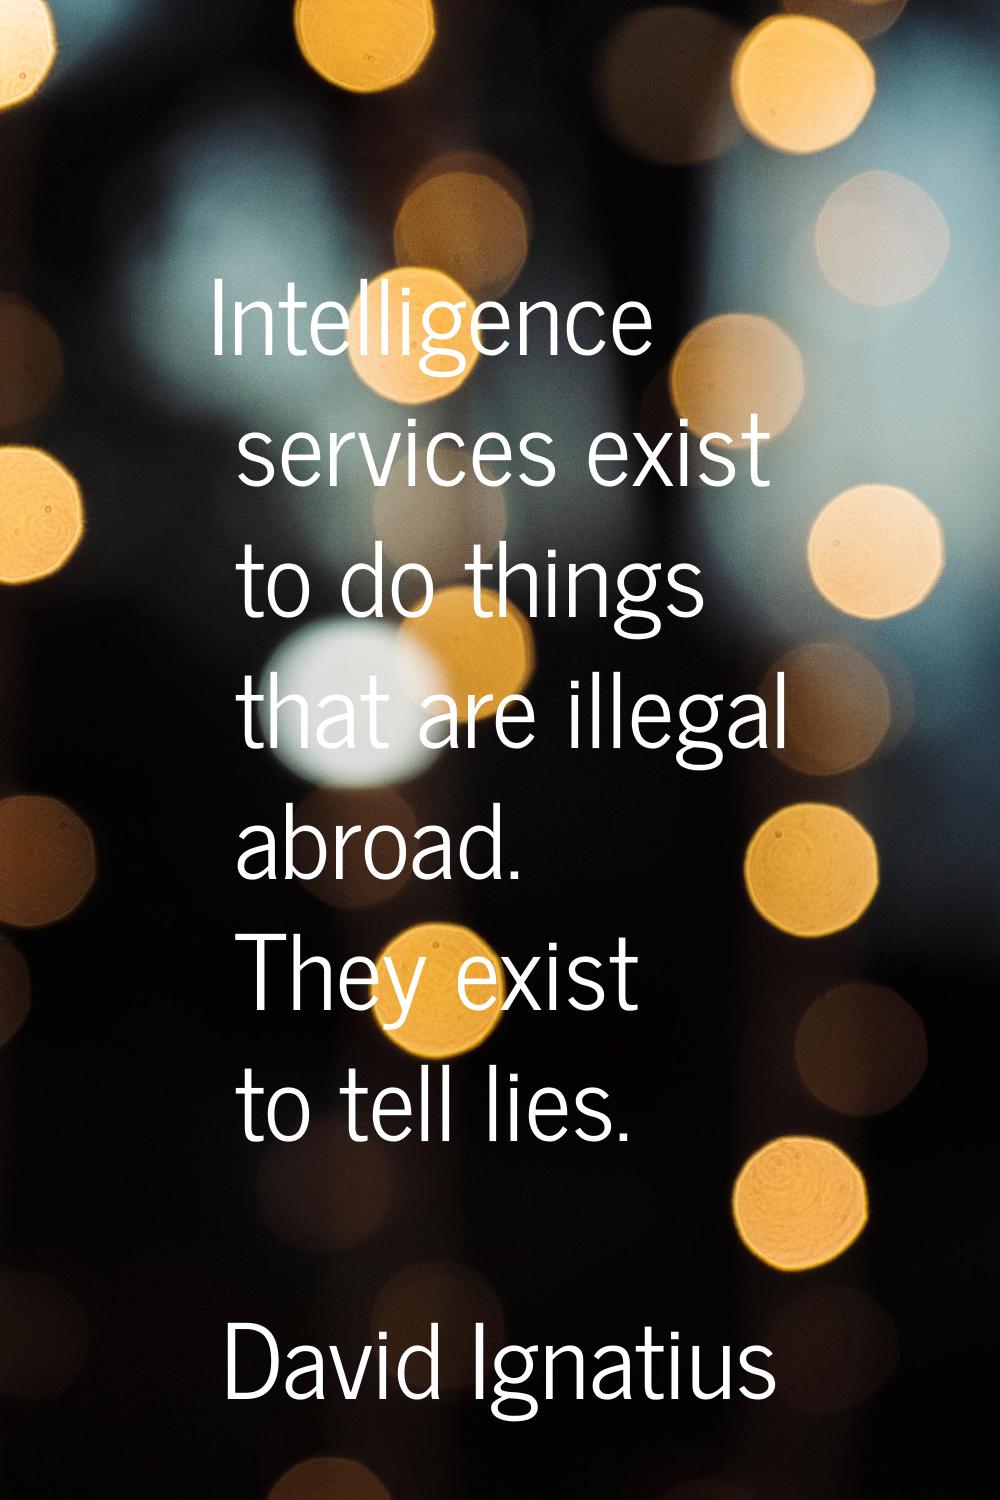 Intelligence services exist to do things that are illegal abroad. They exist to tell lies.